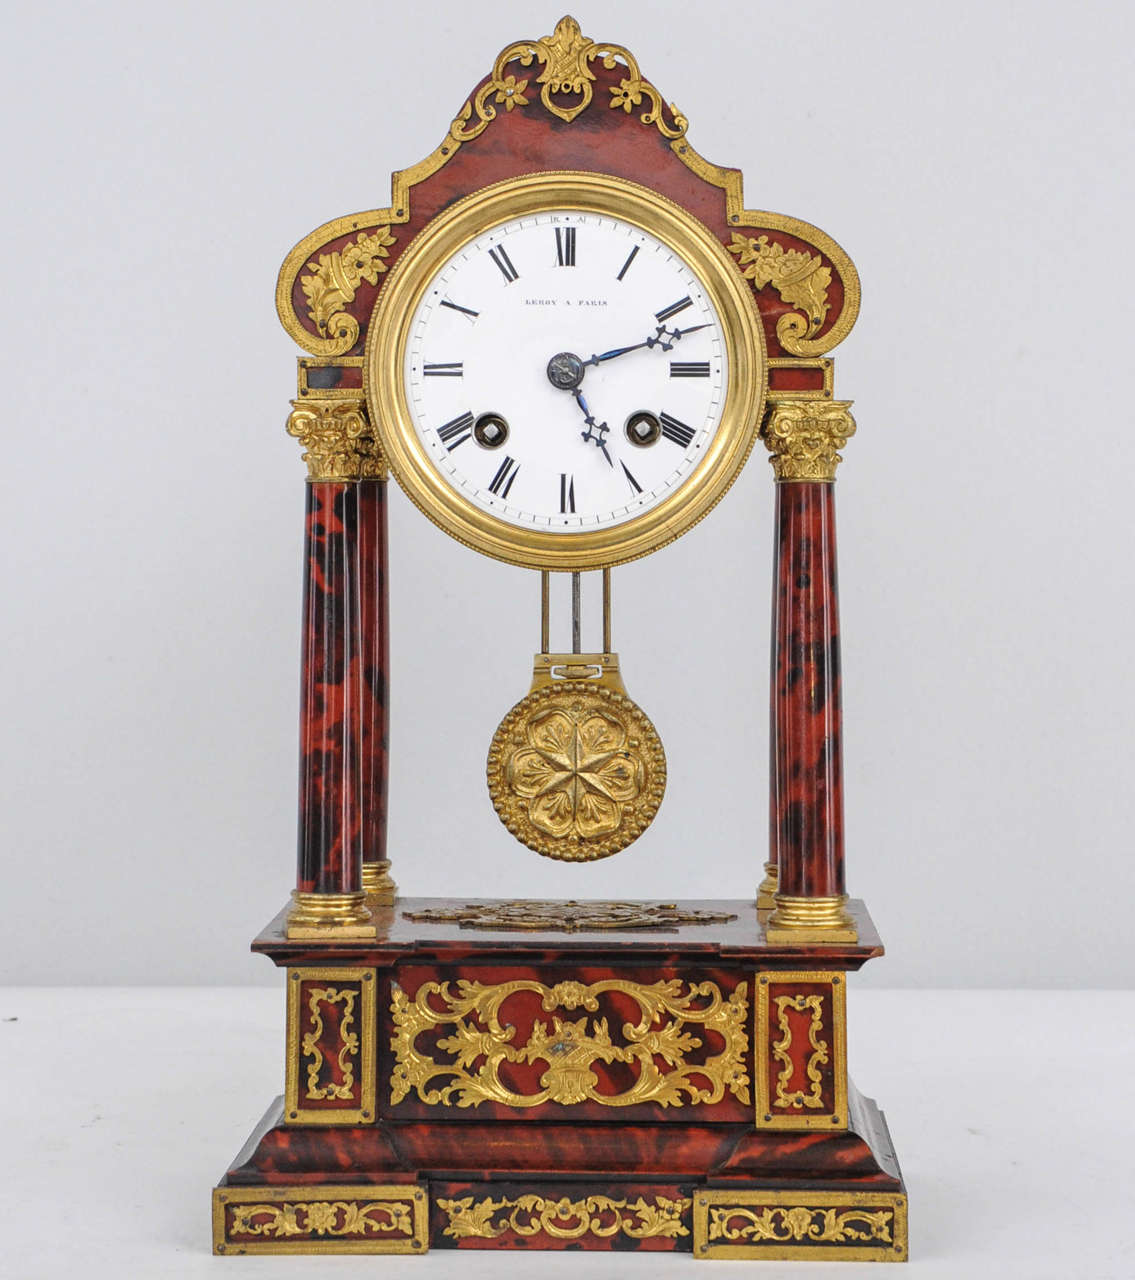 A very attractive small striking charming tortoiseshell four-pillar clock signed Leroy a Paris. Lovely bronze mounts together with matching dome, circa 1880.